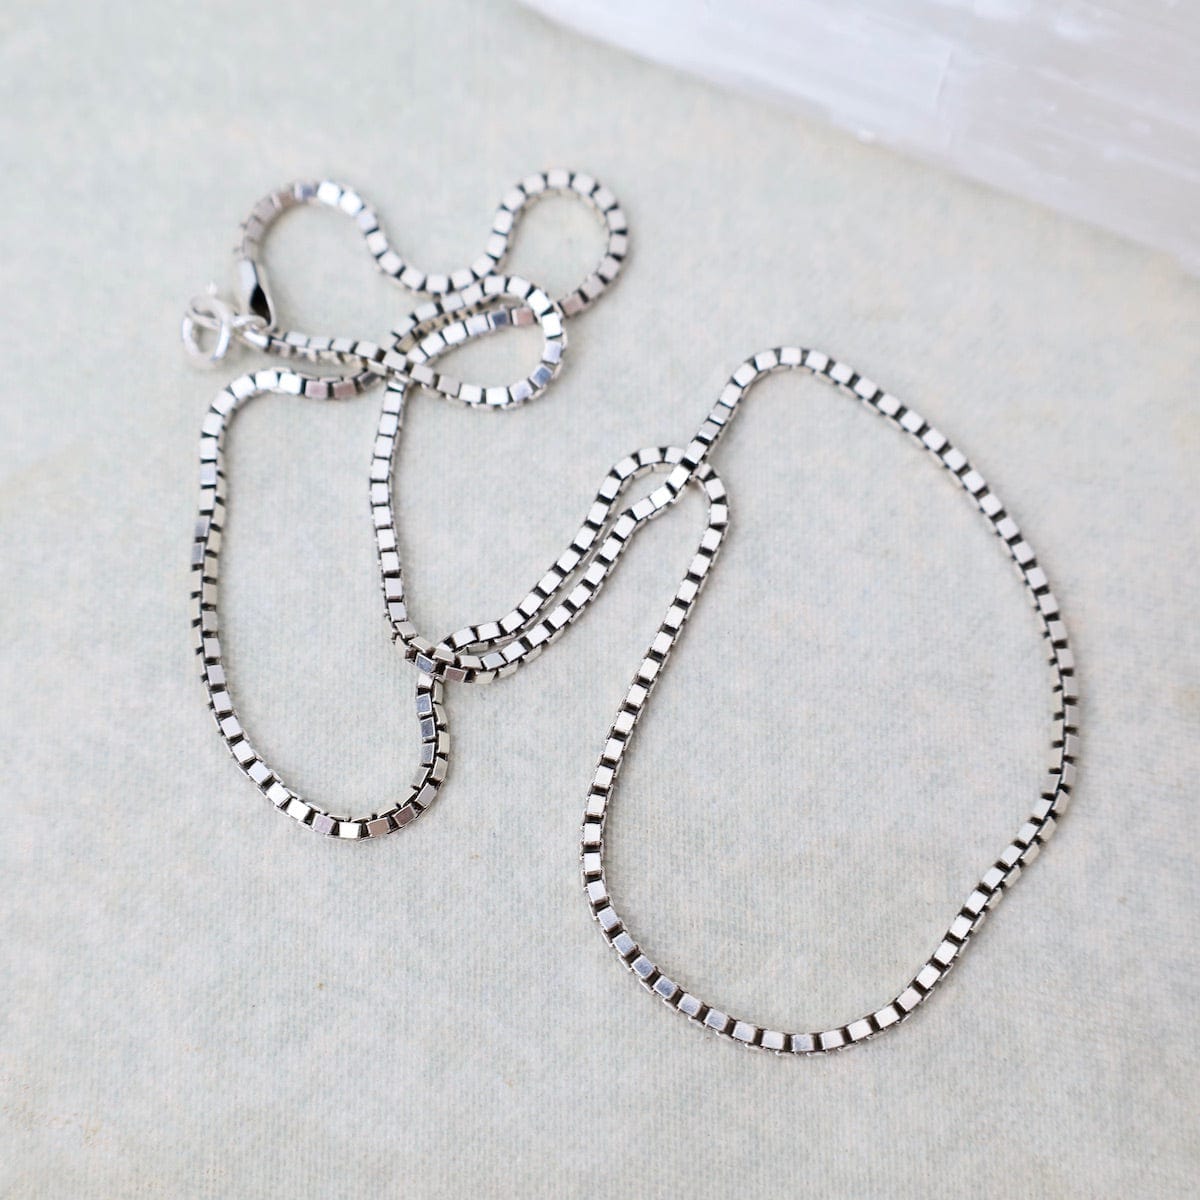 NKL Oxidized Sterling Silver 18" Box Chain